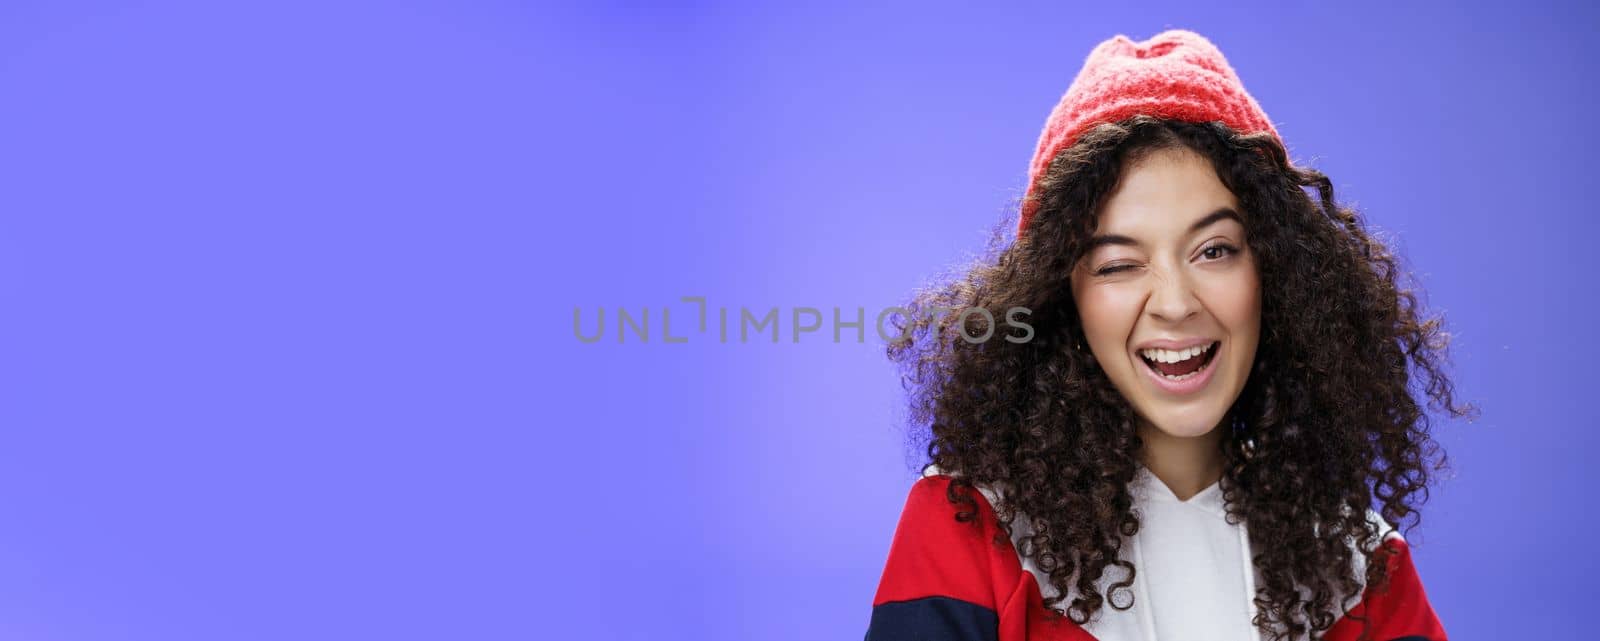 Charming cute woman hinting to go play snowballs with her winking joyfully as inviting us, smiling broadly wearing stylish red beanie and sweatshirt as posing against blue background.